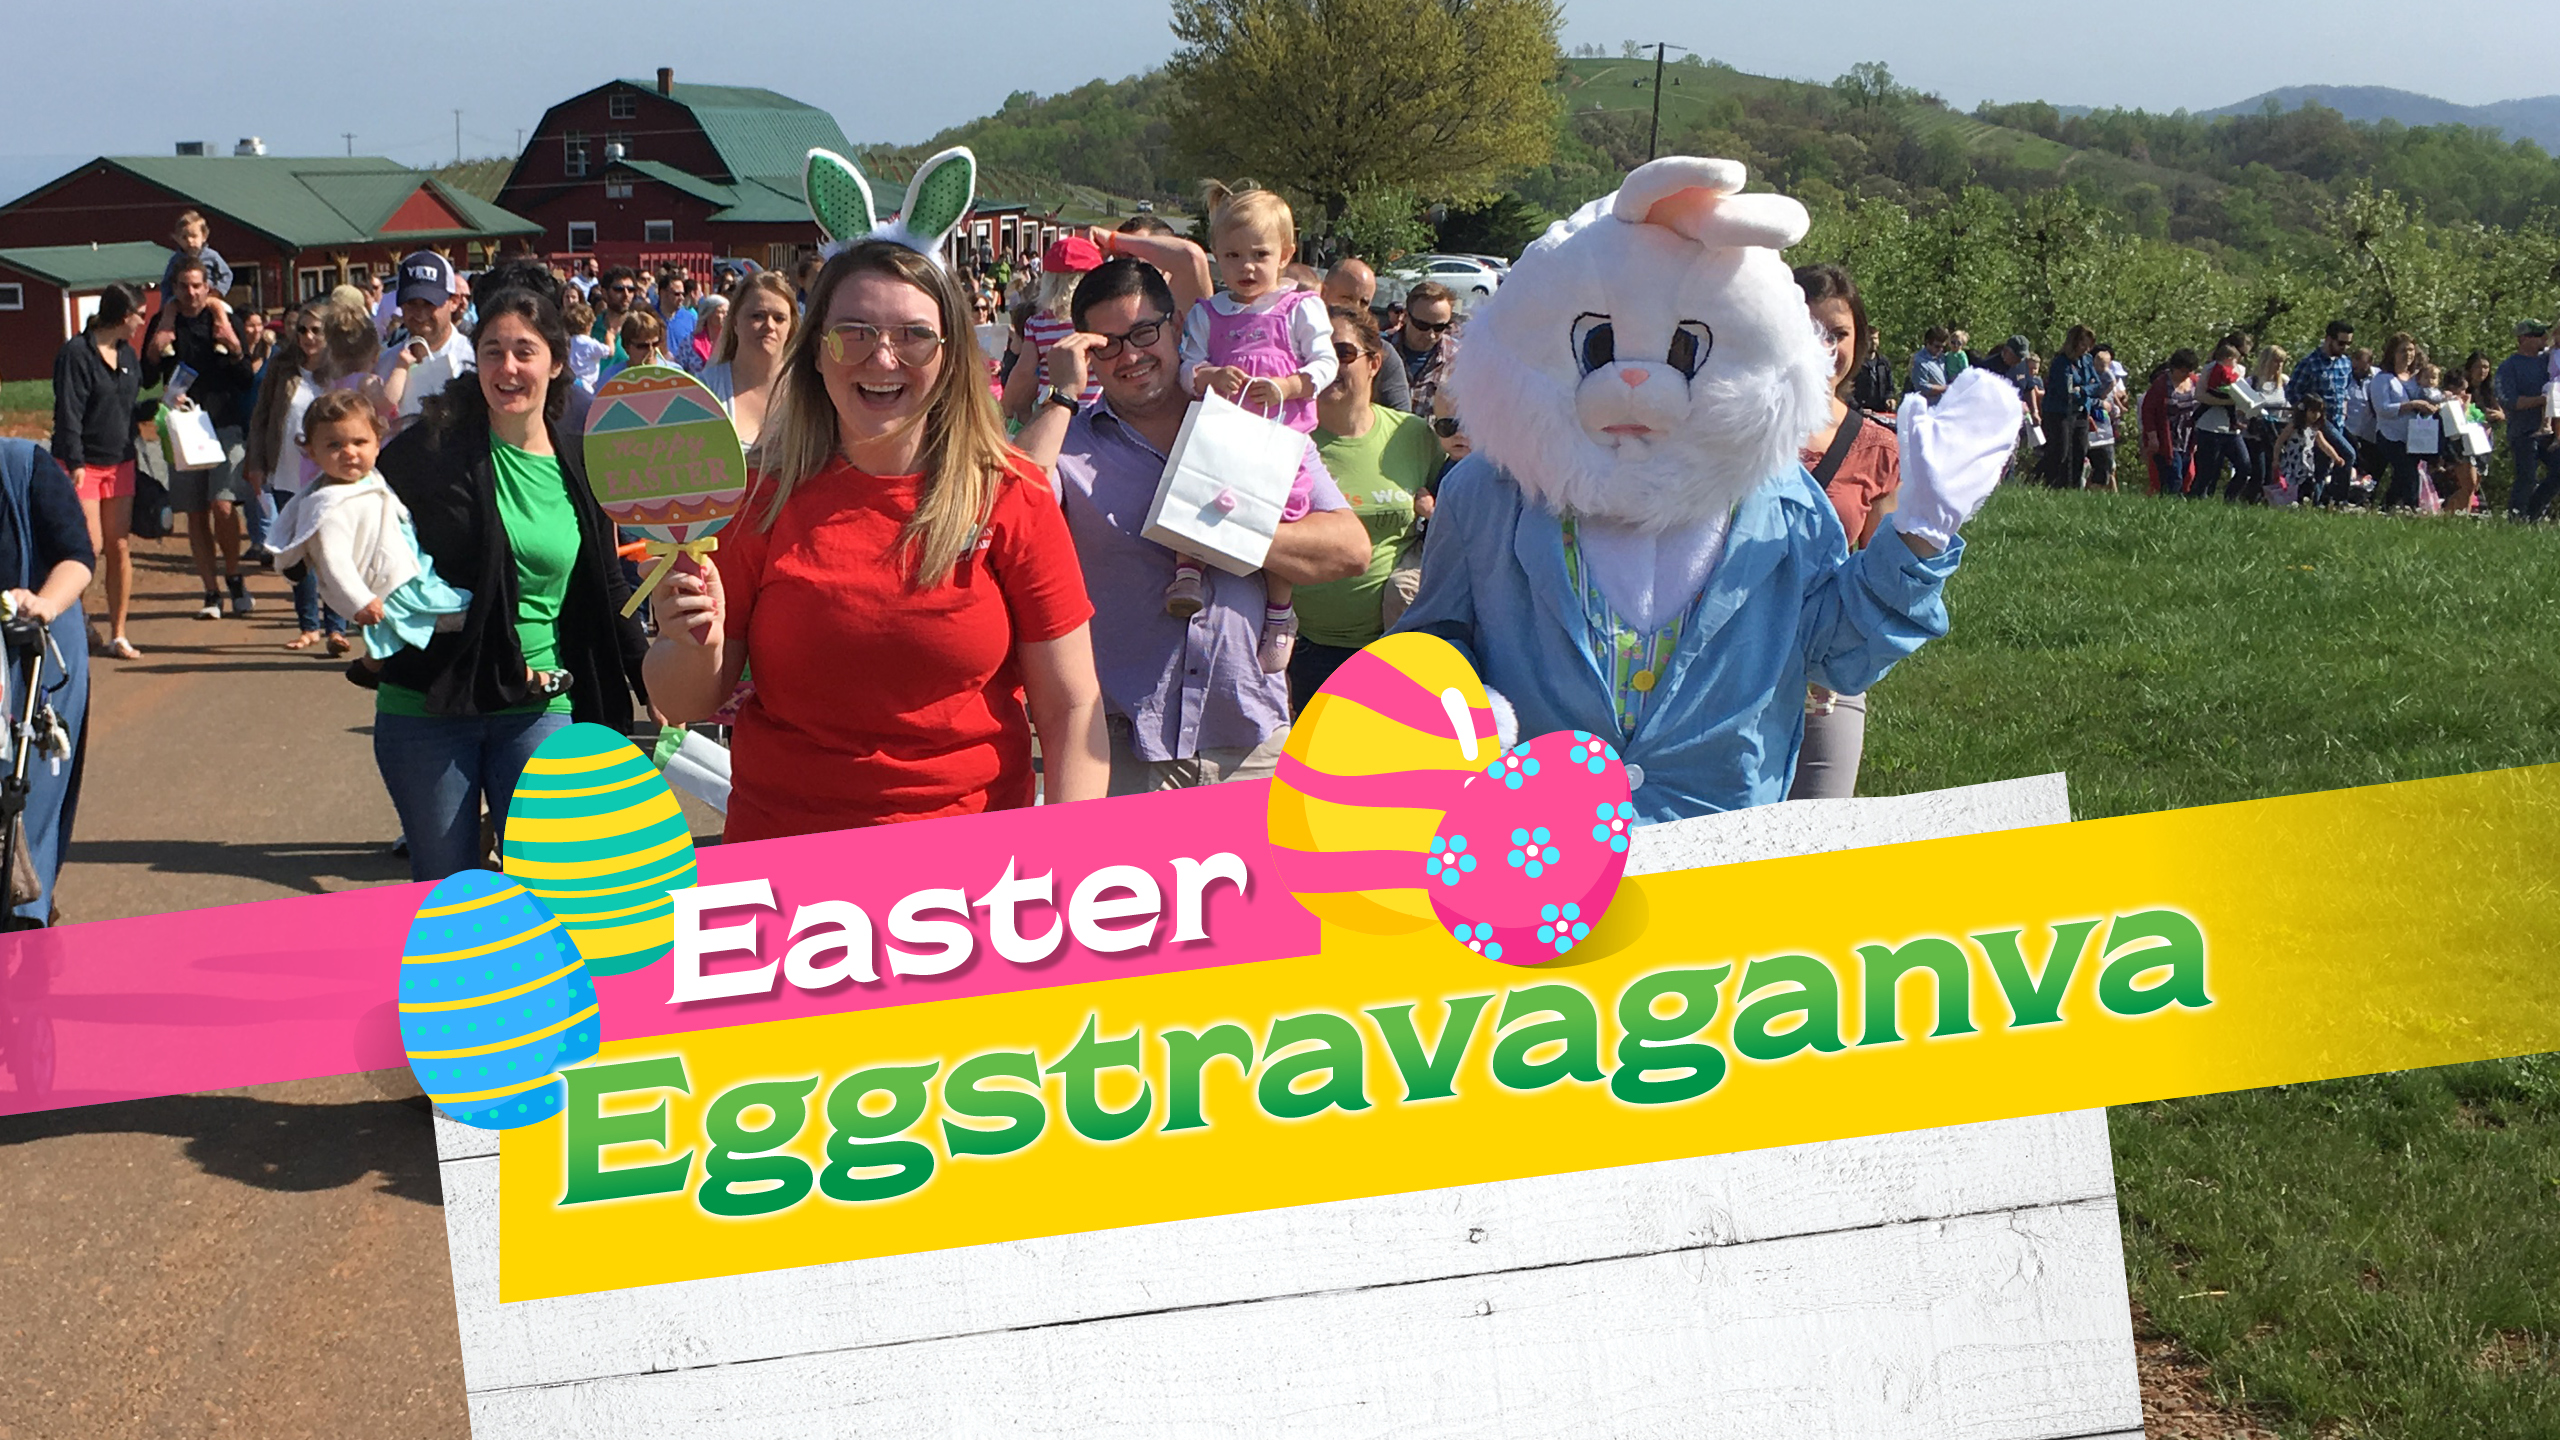 Easter Eggstravaganza event at Carter Mountain Orchard